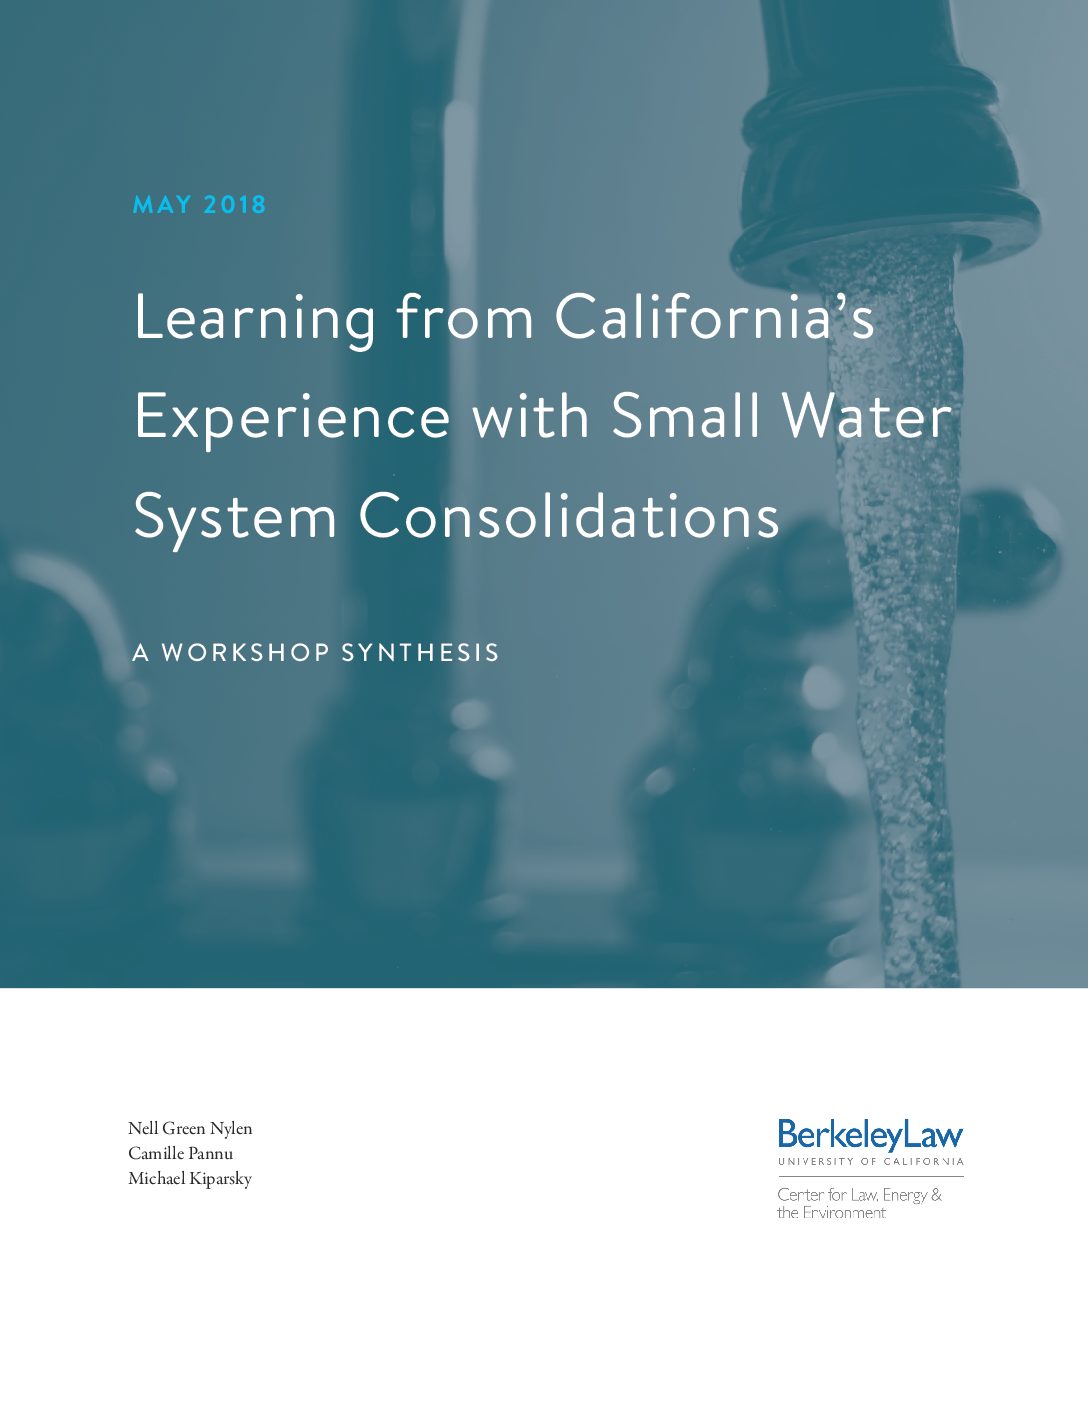 Learning from California’s Experience with Small Water System Consolidations: A Workshop Synthesis